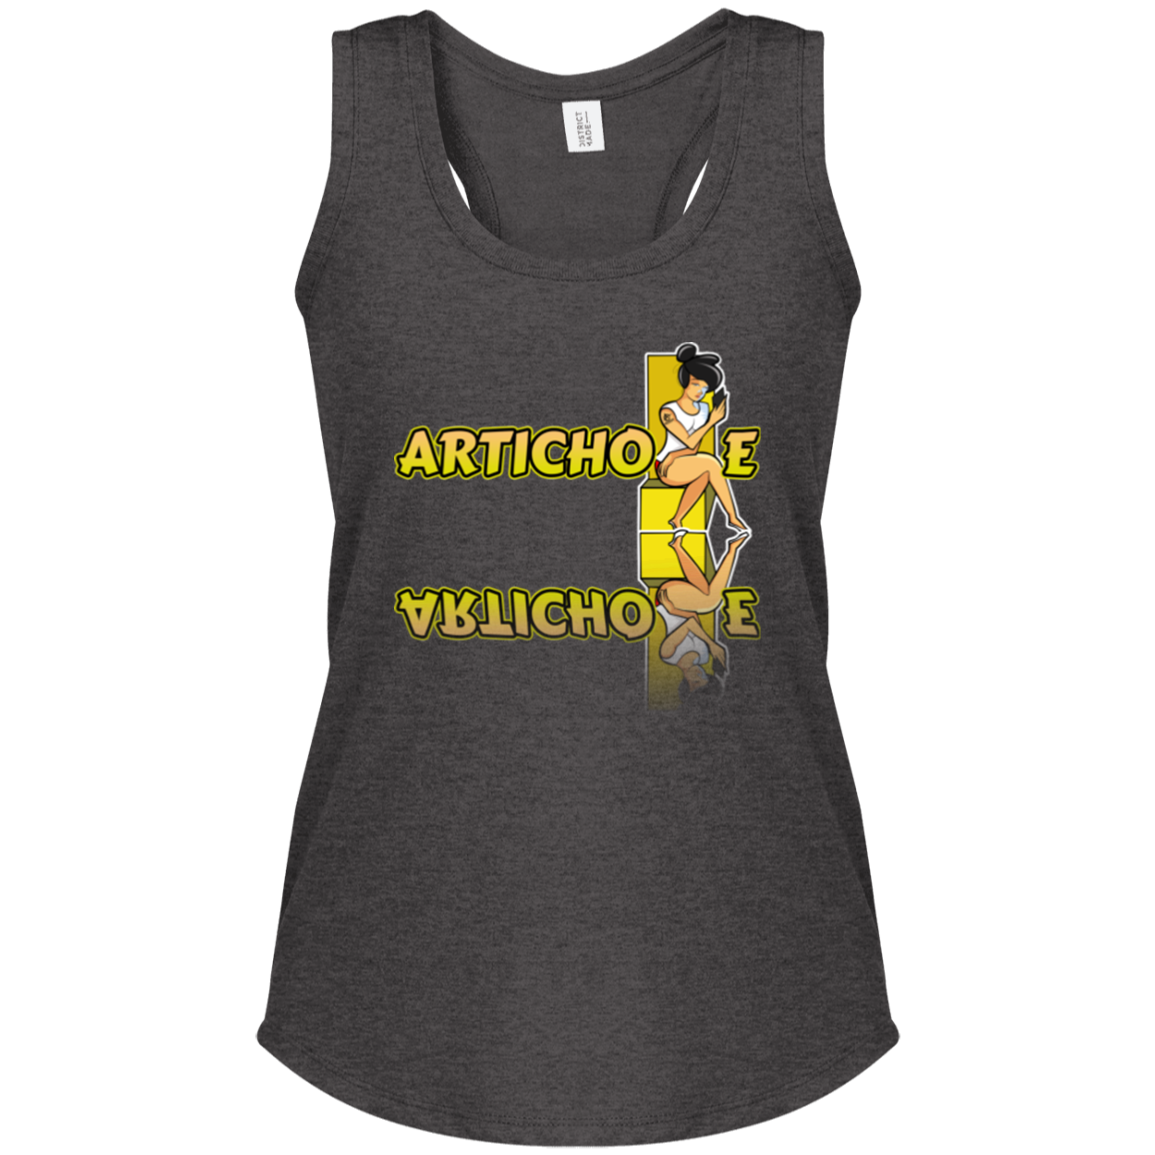 ArtichokeUSA Character and Font Design. Let’s Create Your Own Design Today. Betty. Ladies' Tri Racerback Tank